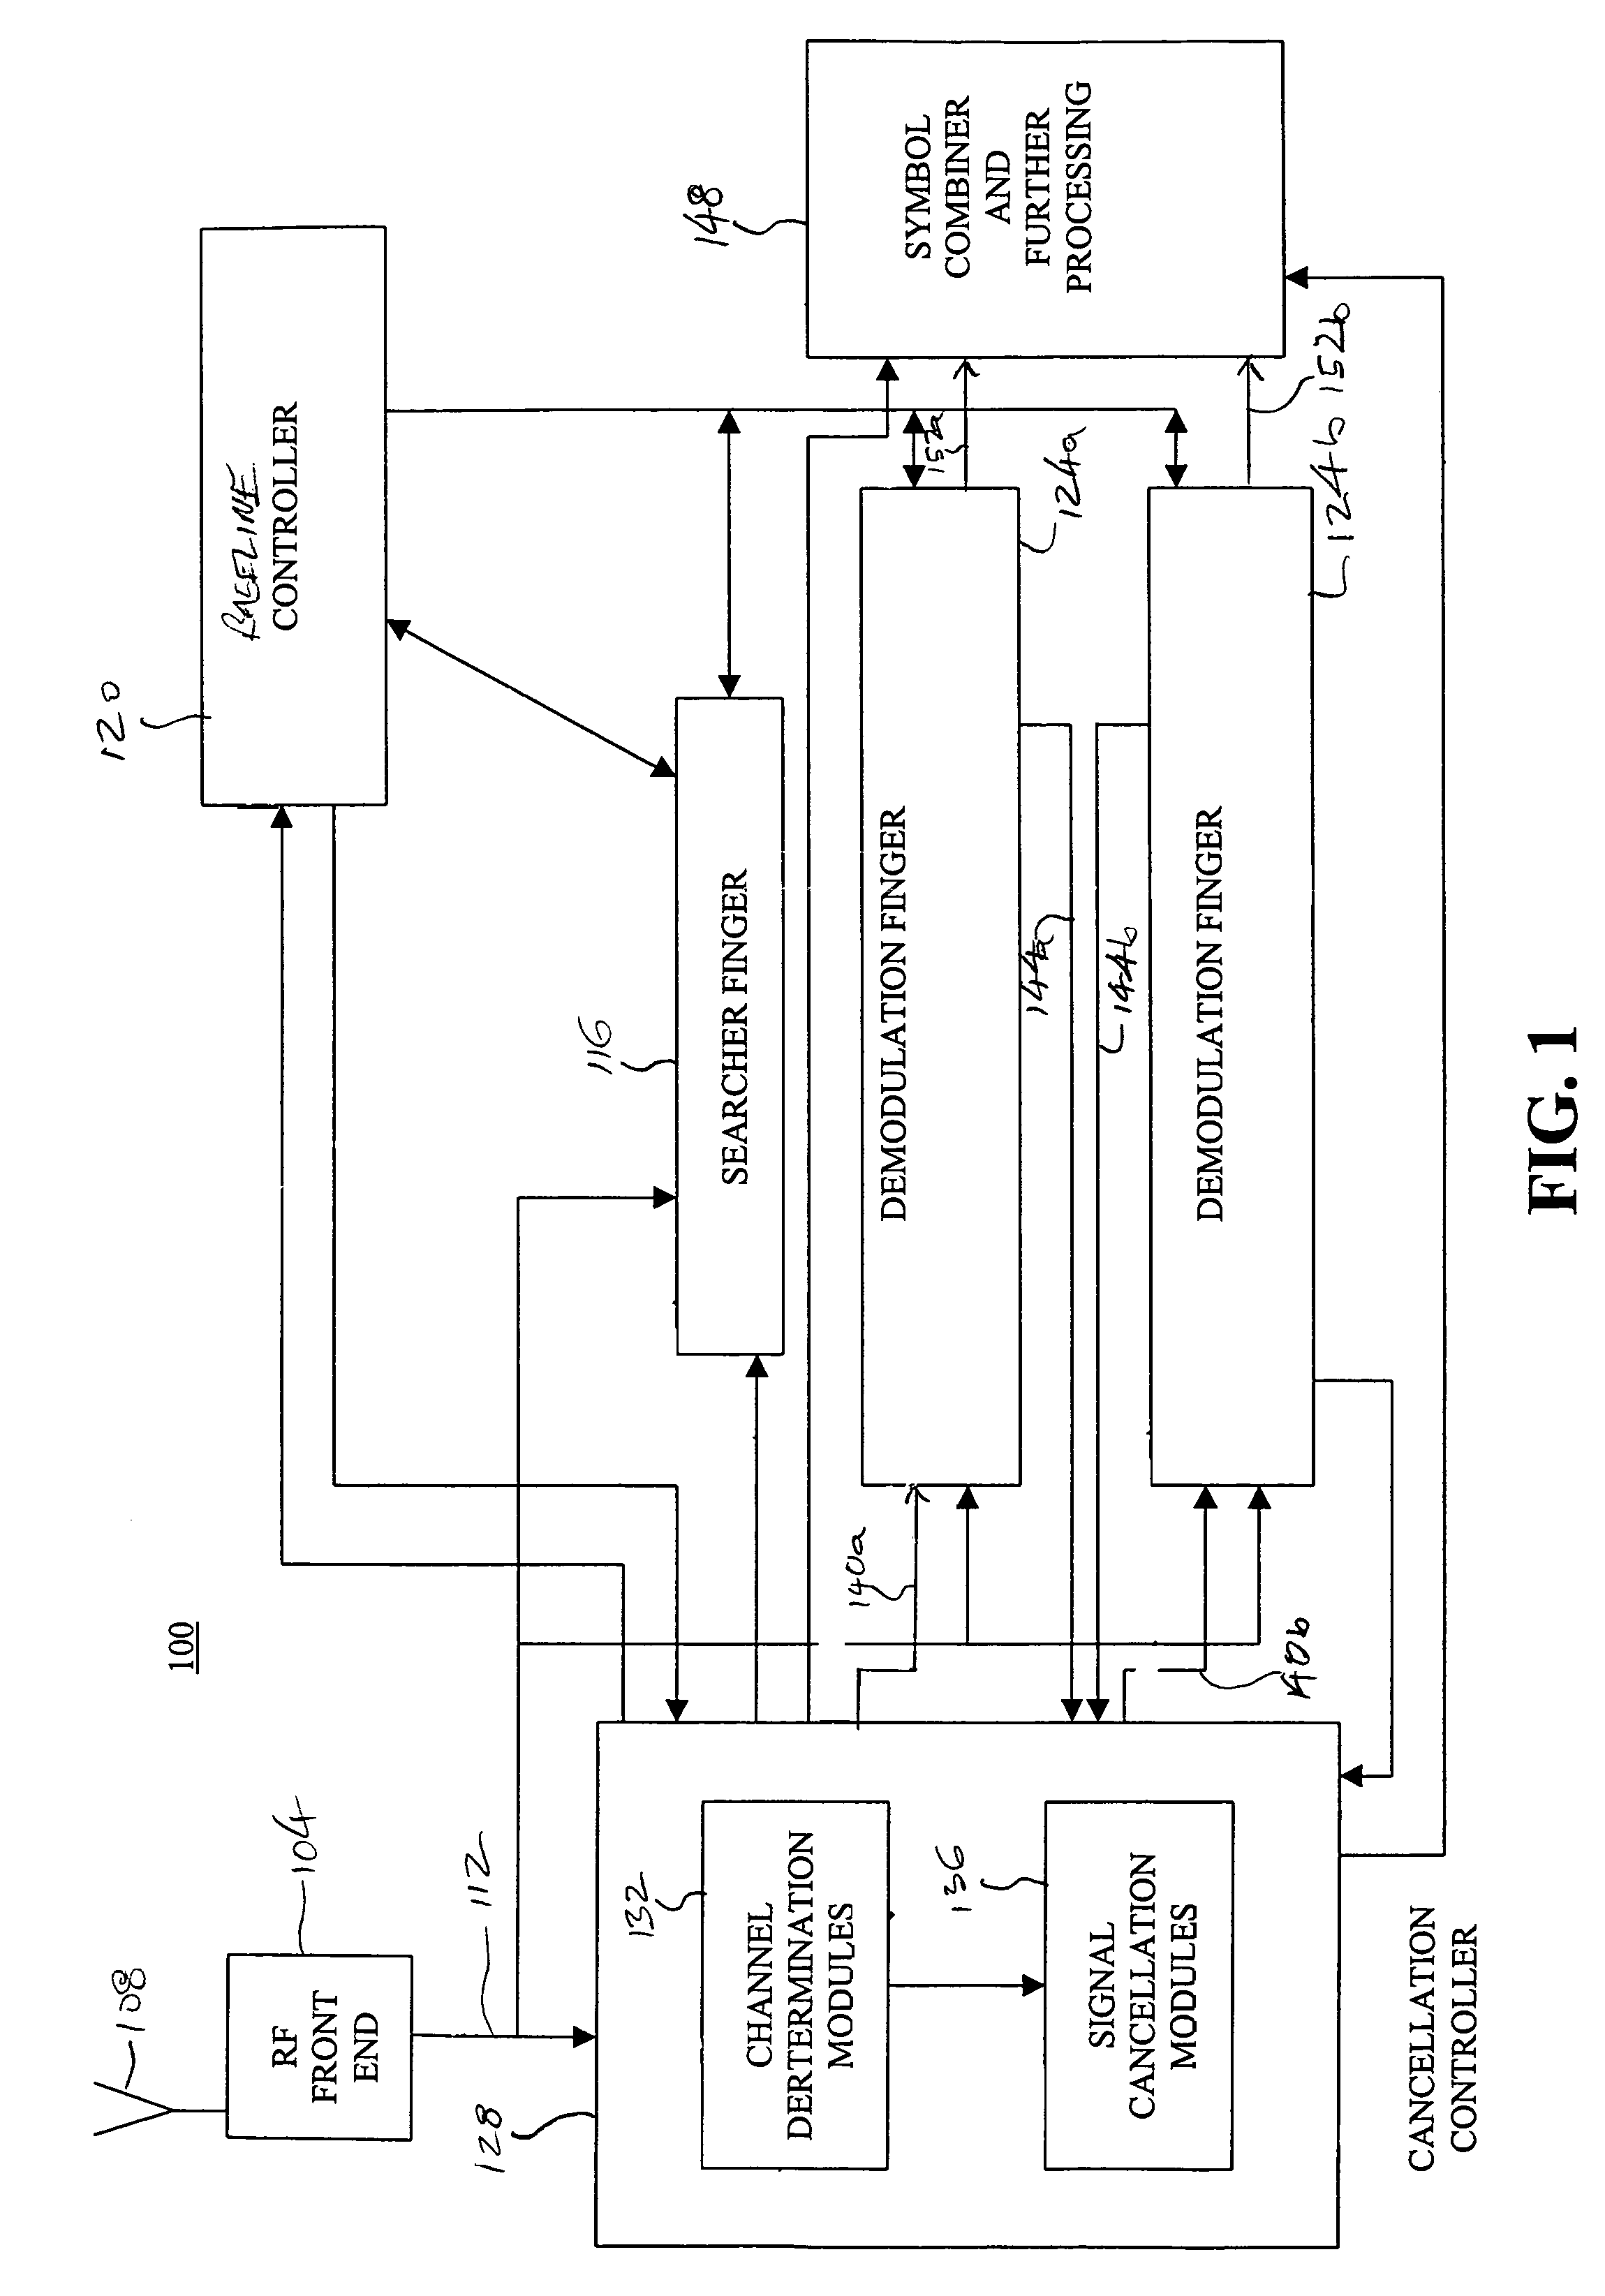 Method and apparatus for interference suppression with efficient matrix inversion in a DS-CDMA system